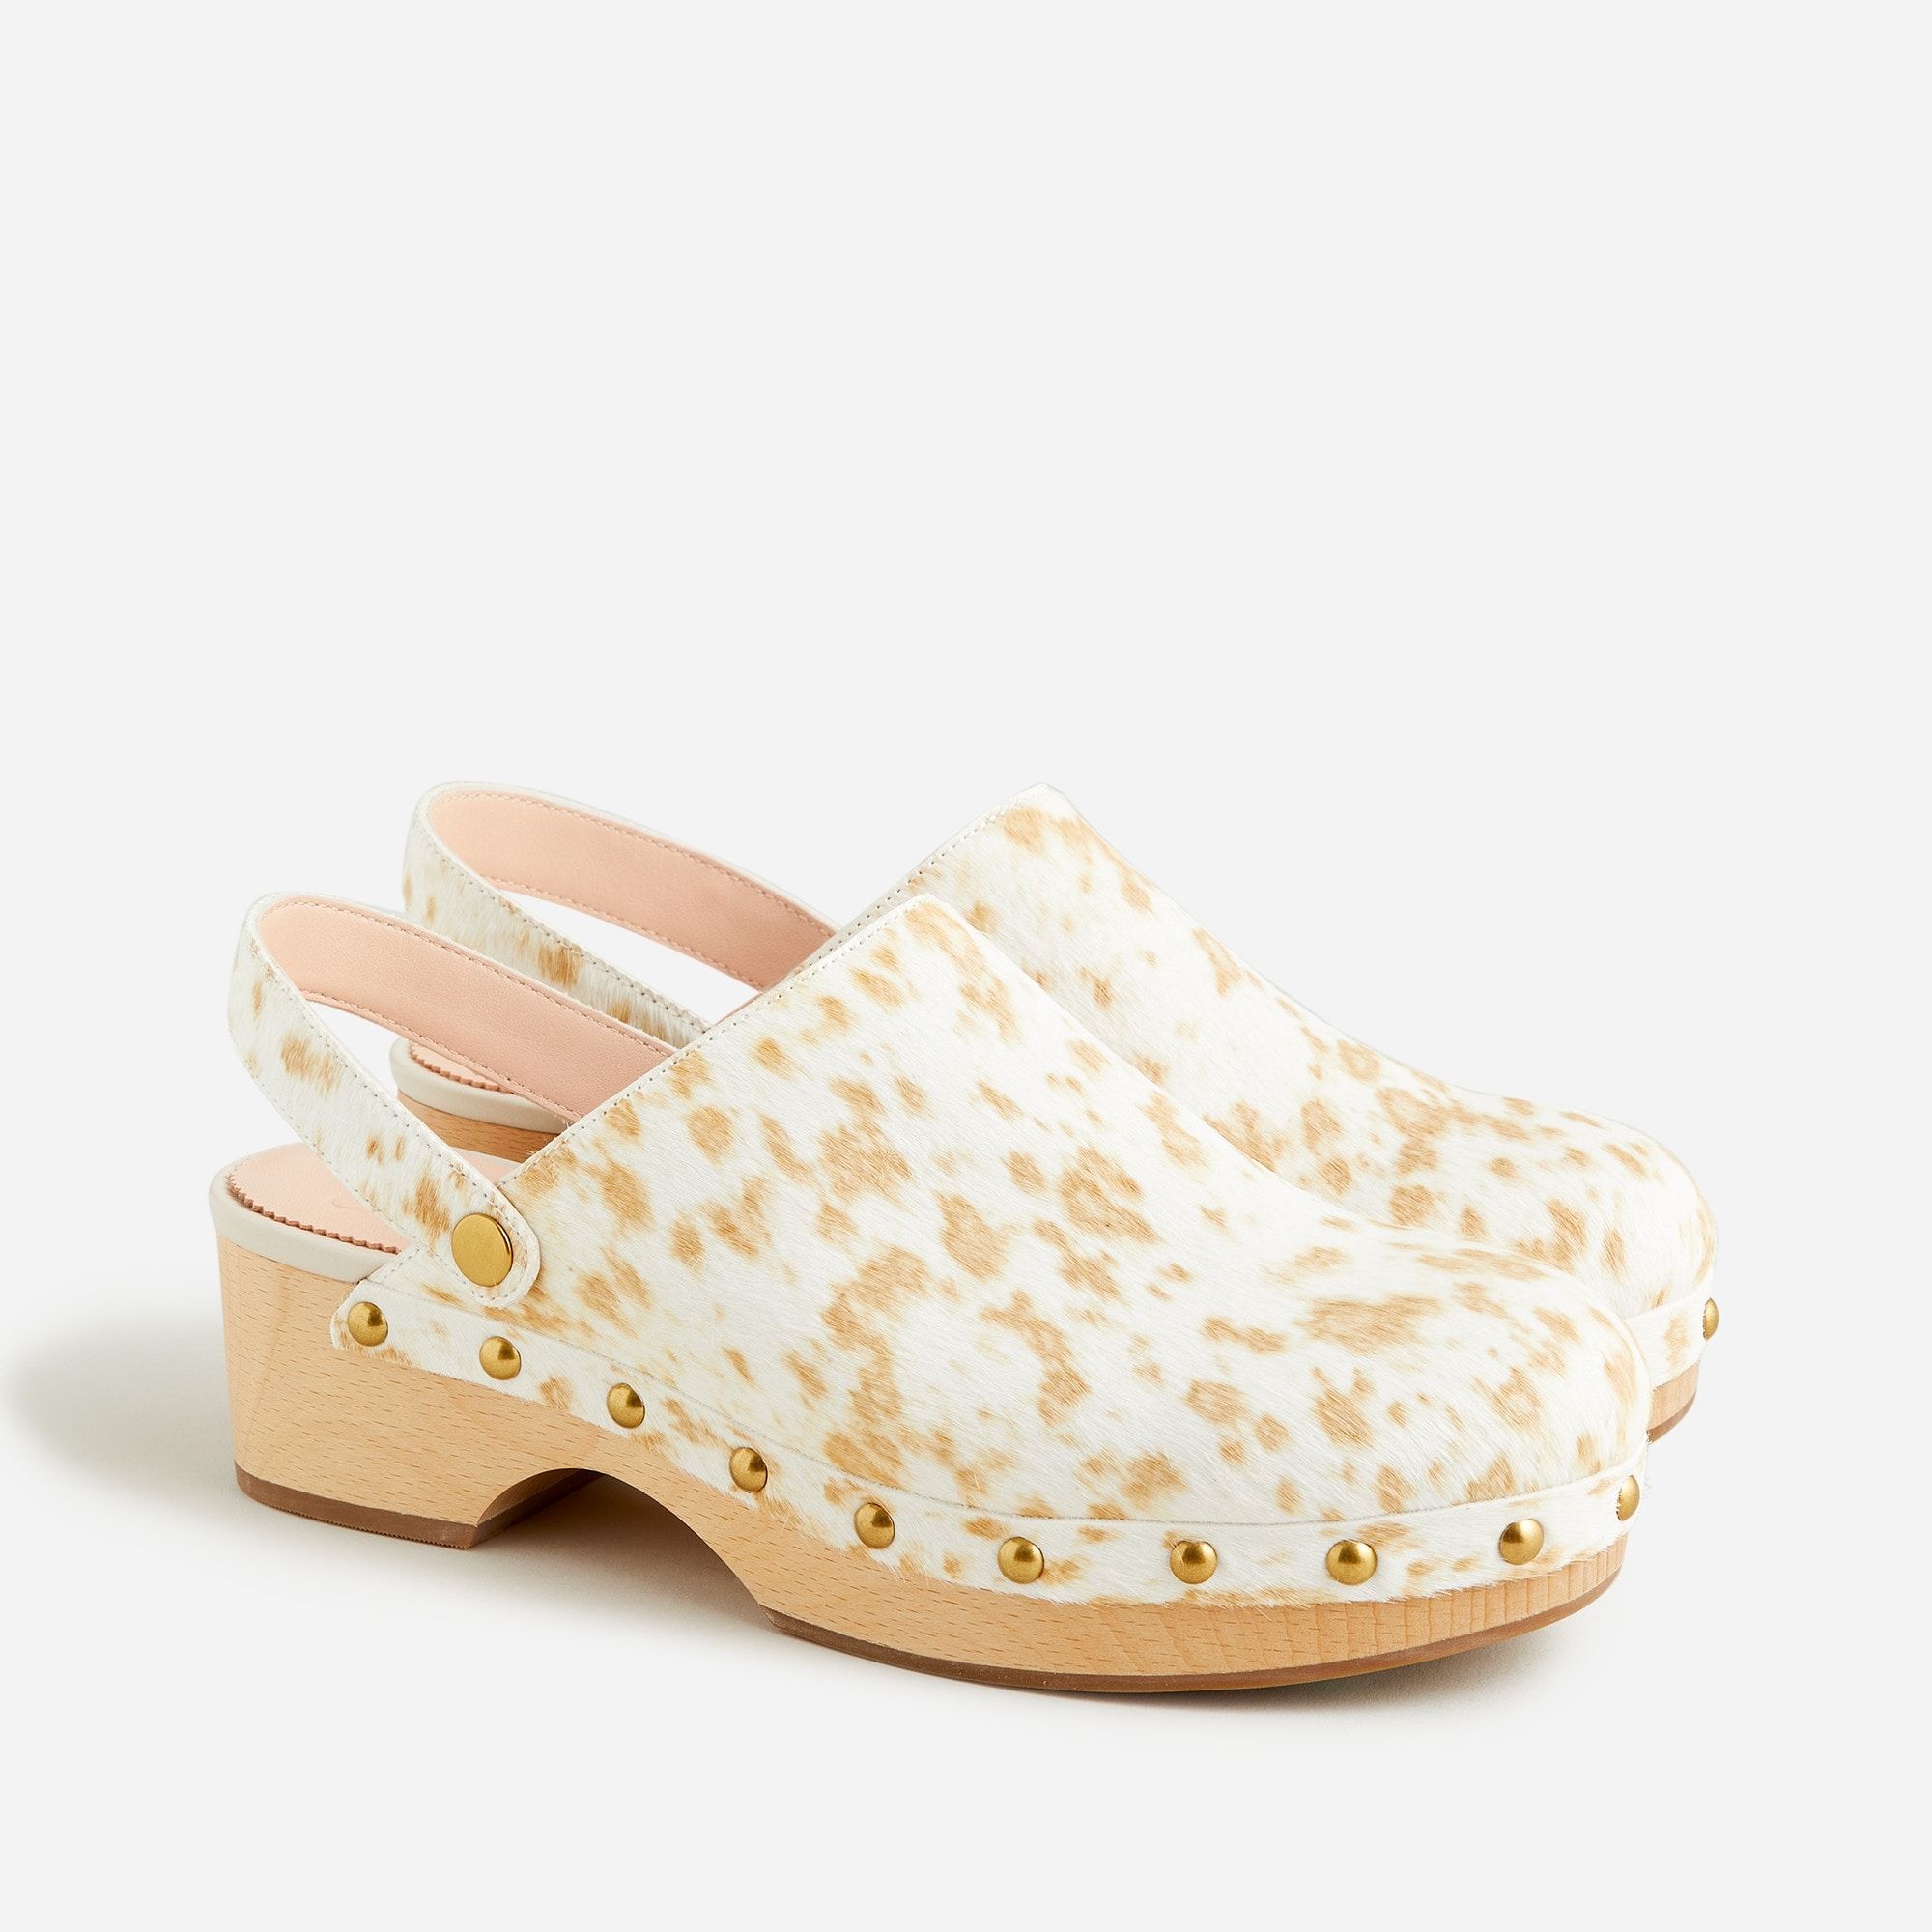 Calf hair convertible-strap leather clogs | J.Crew US